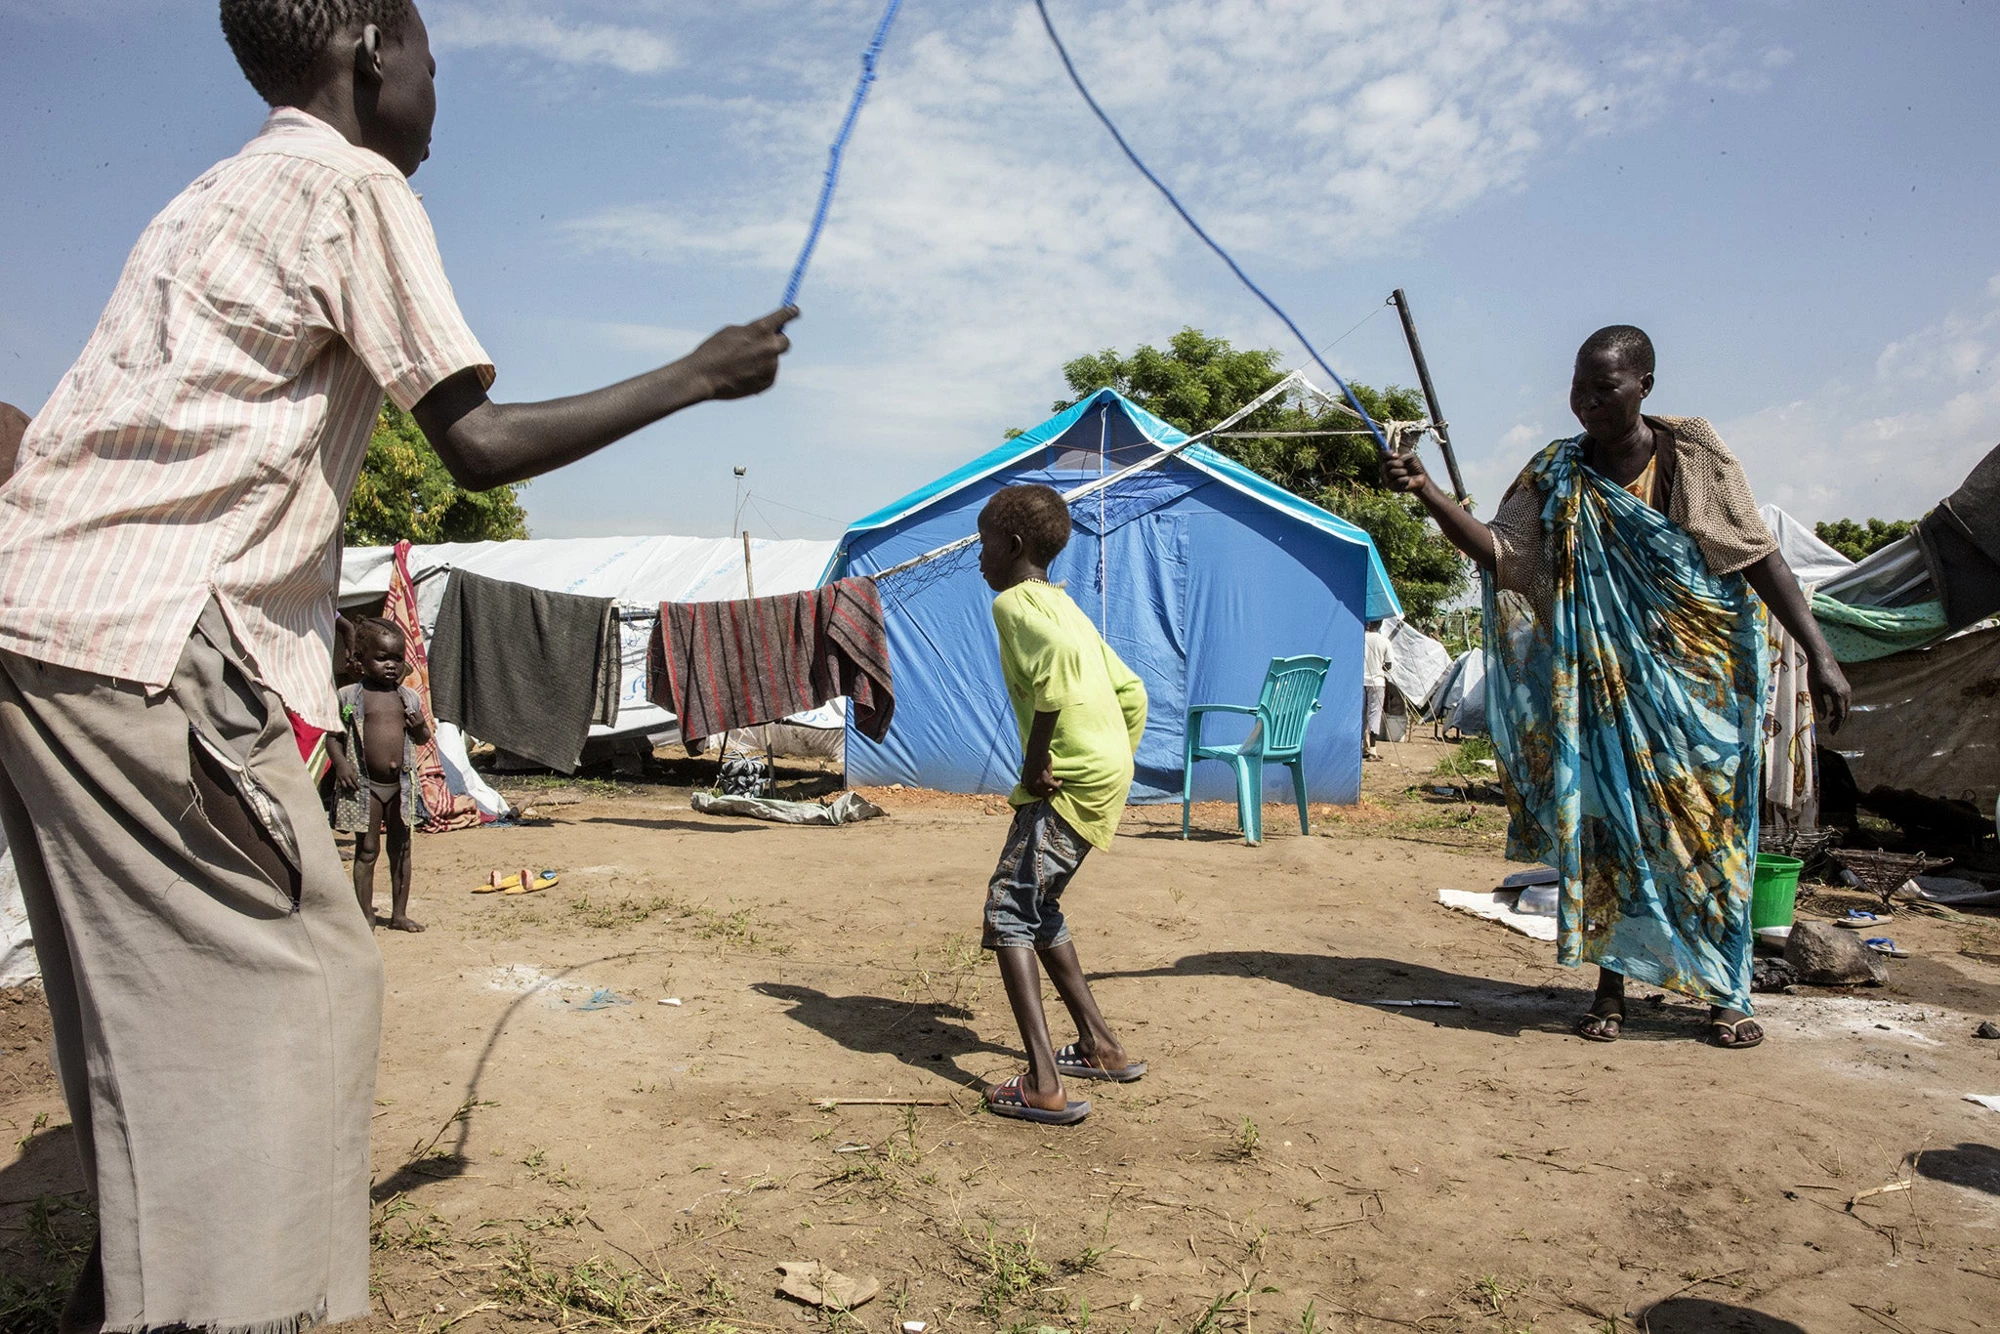 Displaced children residing at a United Nations transit site in South Sudan take time to play. © UN Photo/Isaac Billy